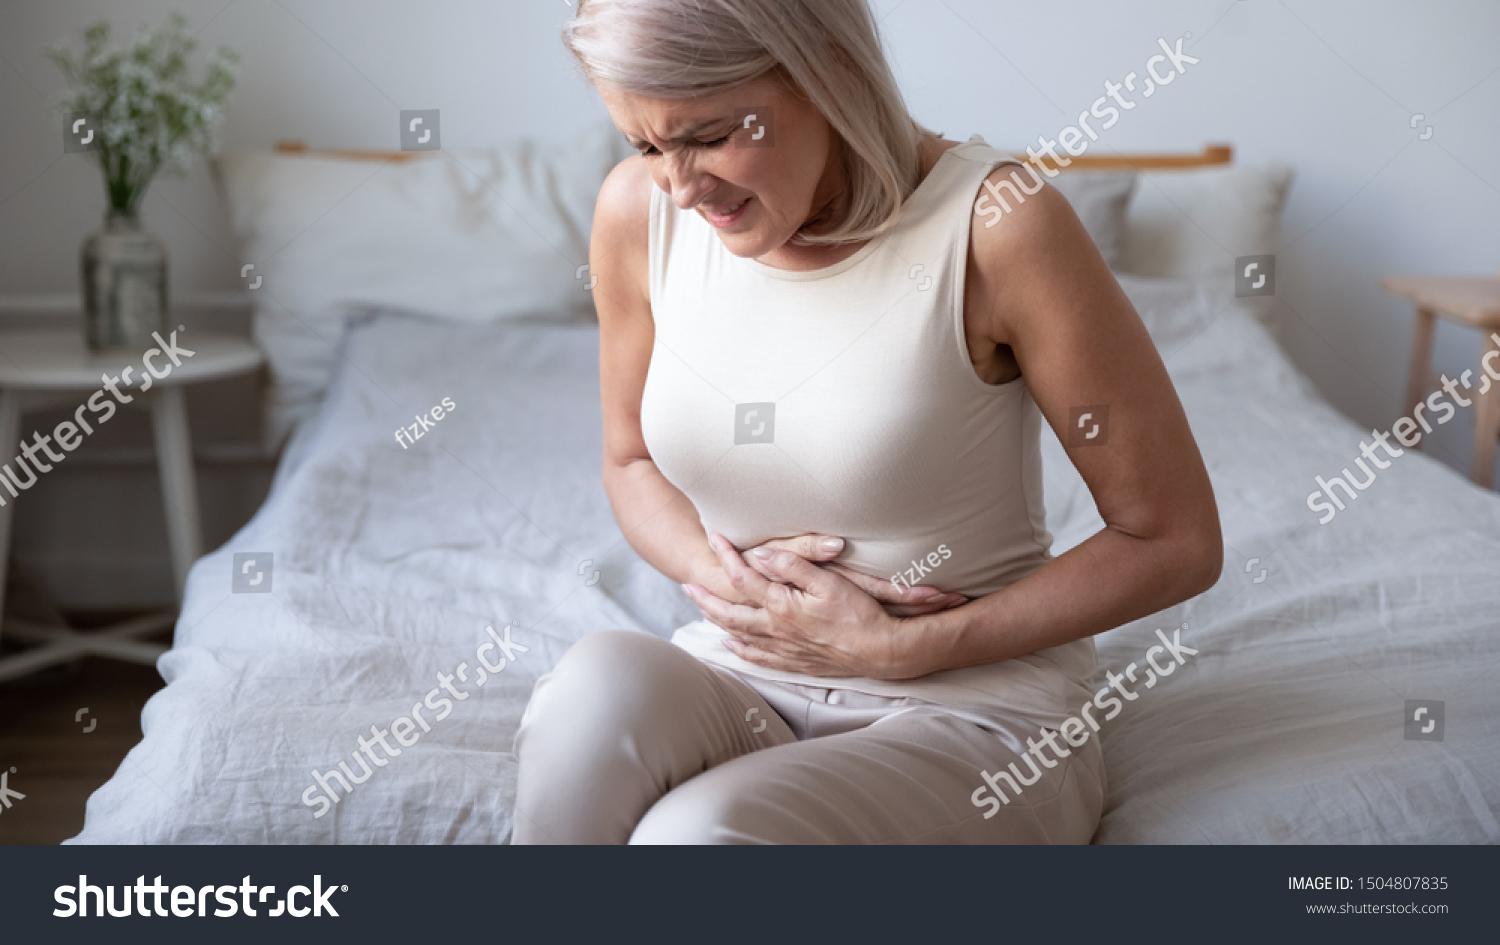 Unhealthy mature woman holding belly, feeling discomfort, health problem concept, unhappy older female sitting on bed, suffering from stomachache, food poisoning, gastritis, abdominal pain, climax #1504807835